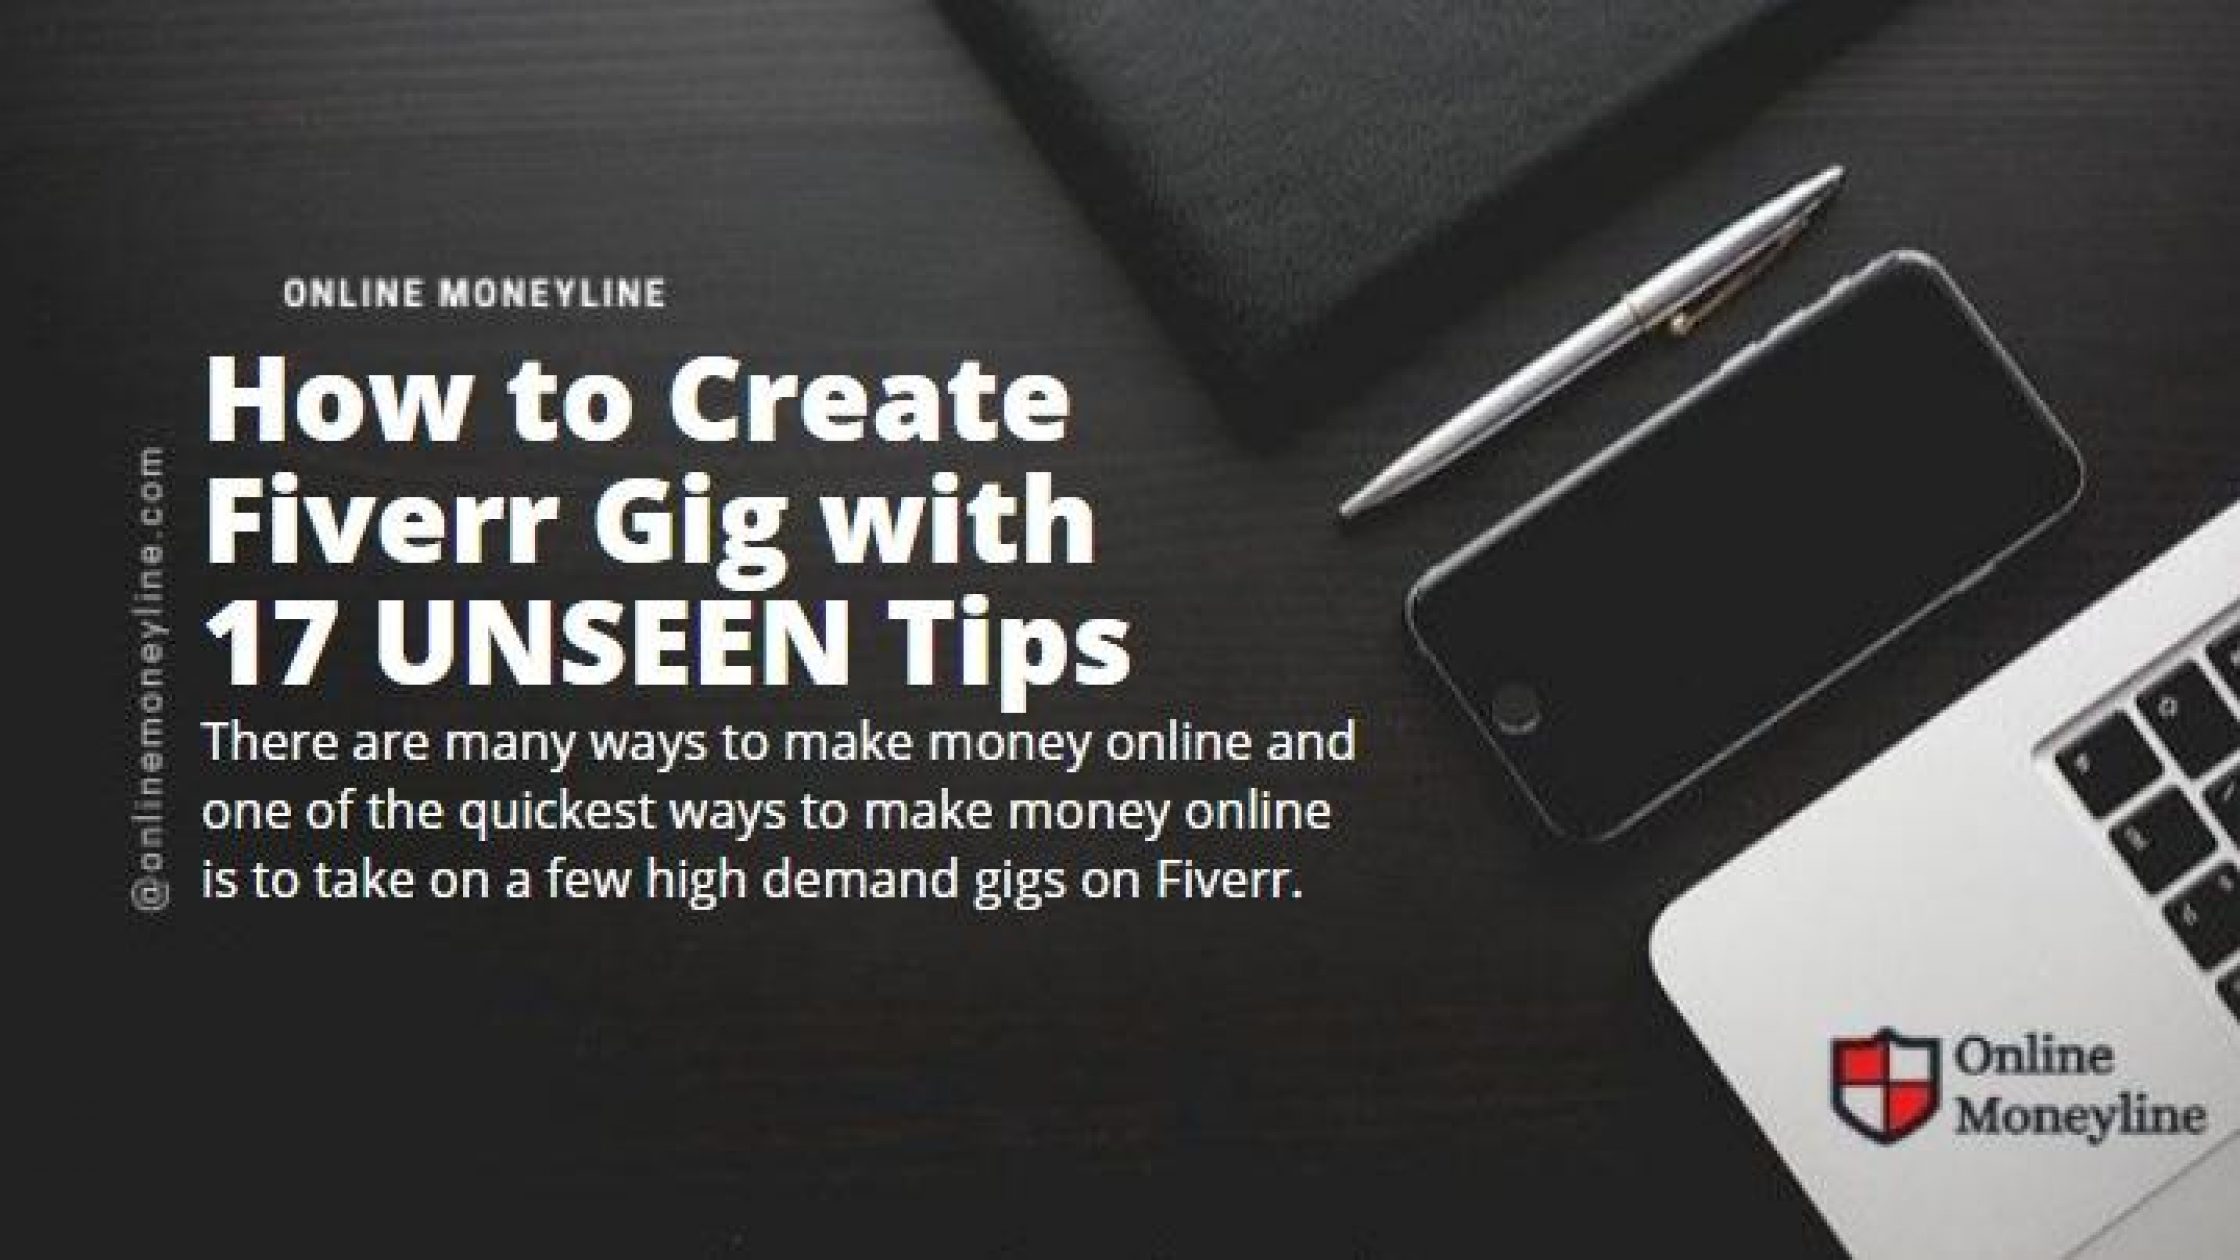 How to Create Fiverr Gig with 17 UNSEEN Tips